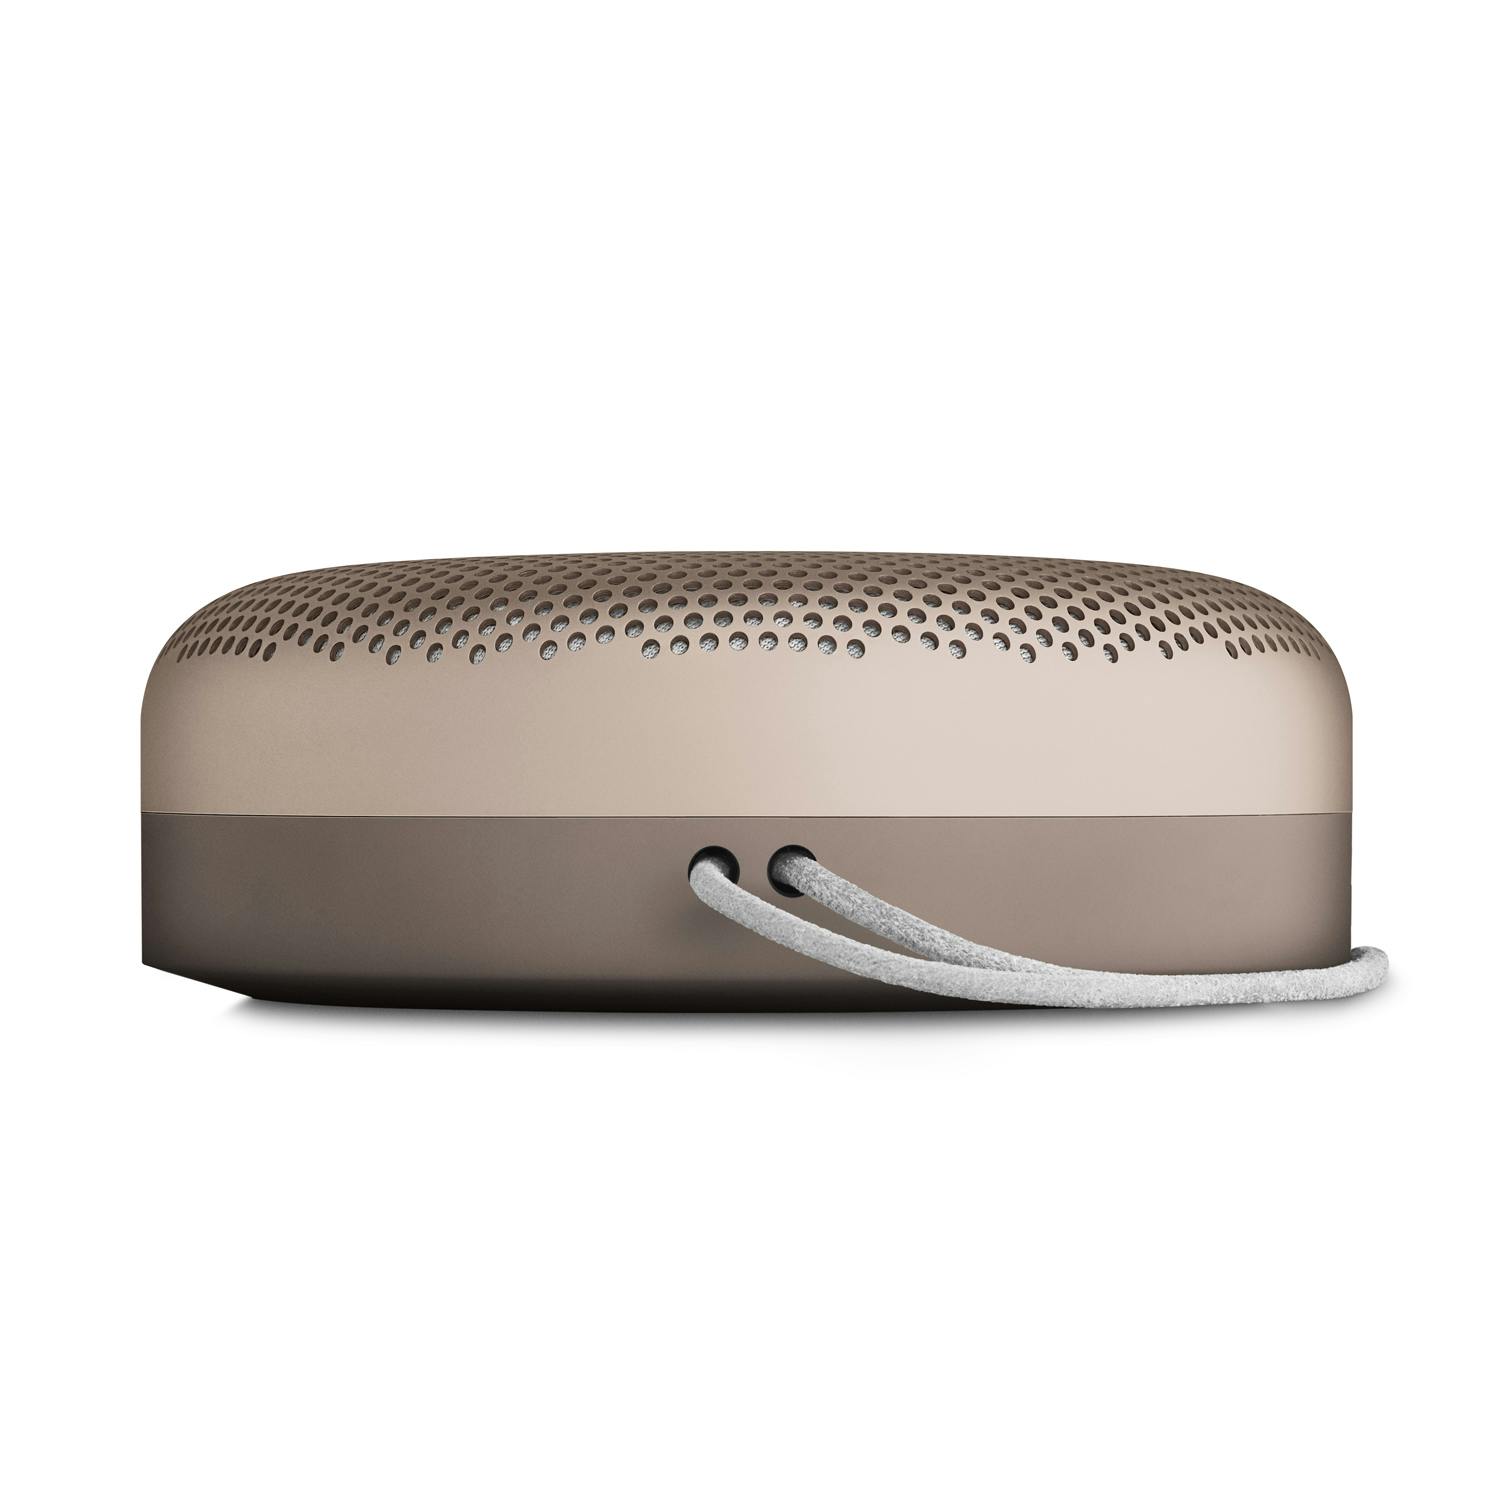 Bang & Olufsen BeoPlay A1